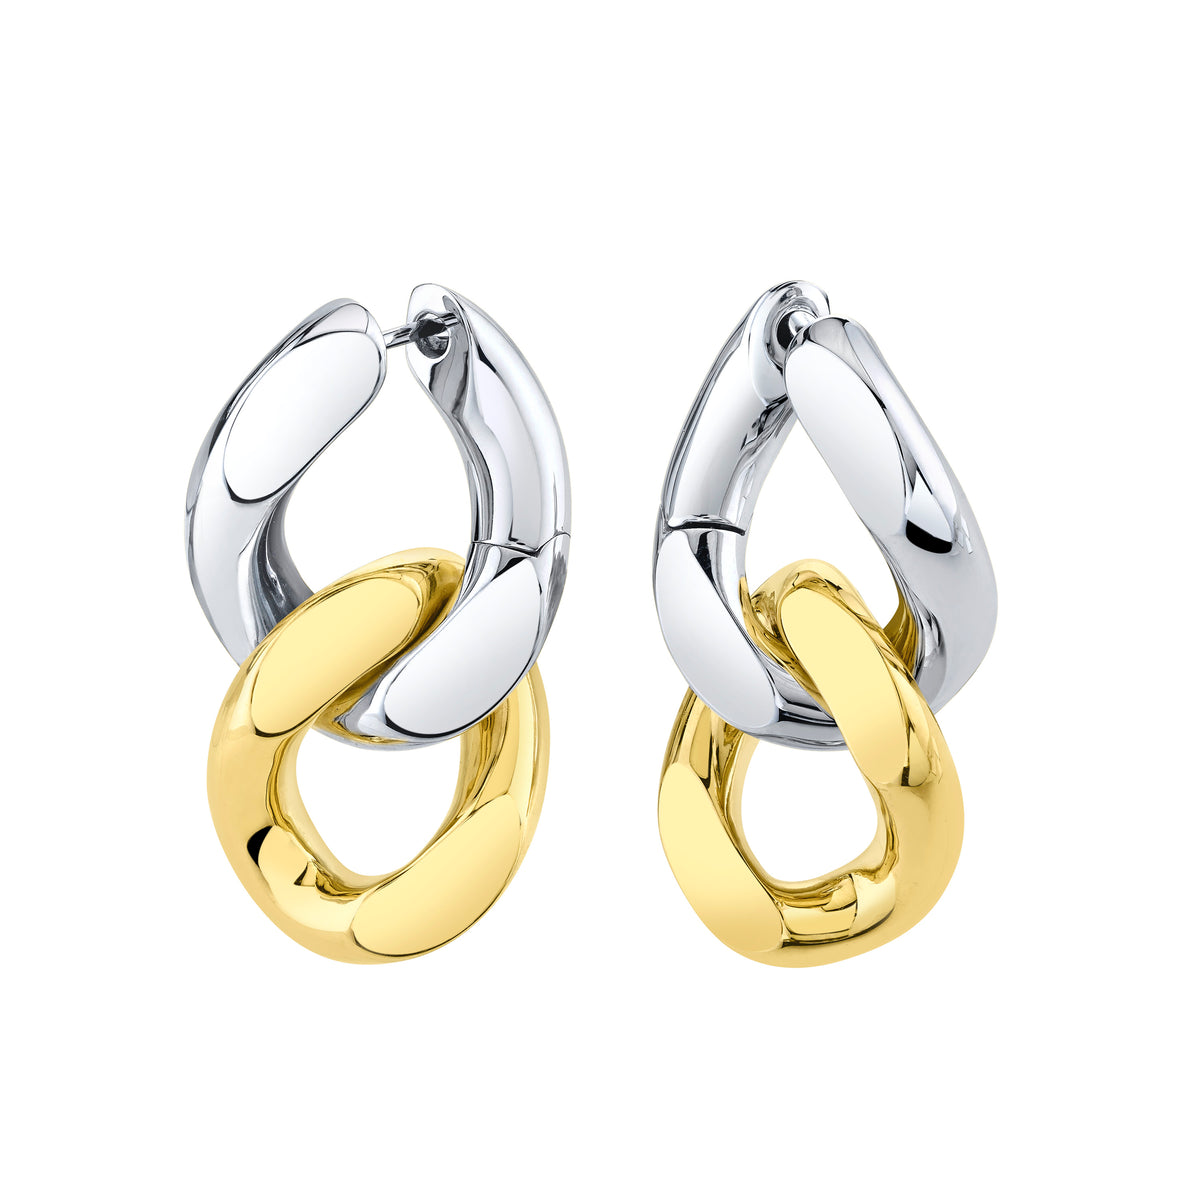 SOLID GOLD TWO TONE FLAT LINK EARRINGS